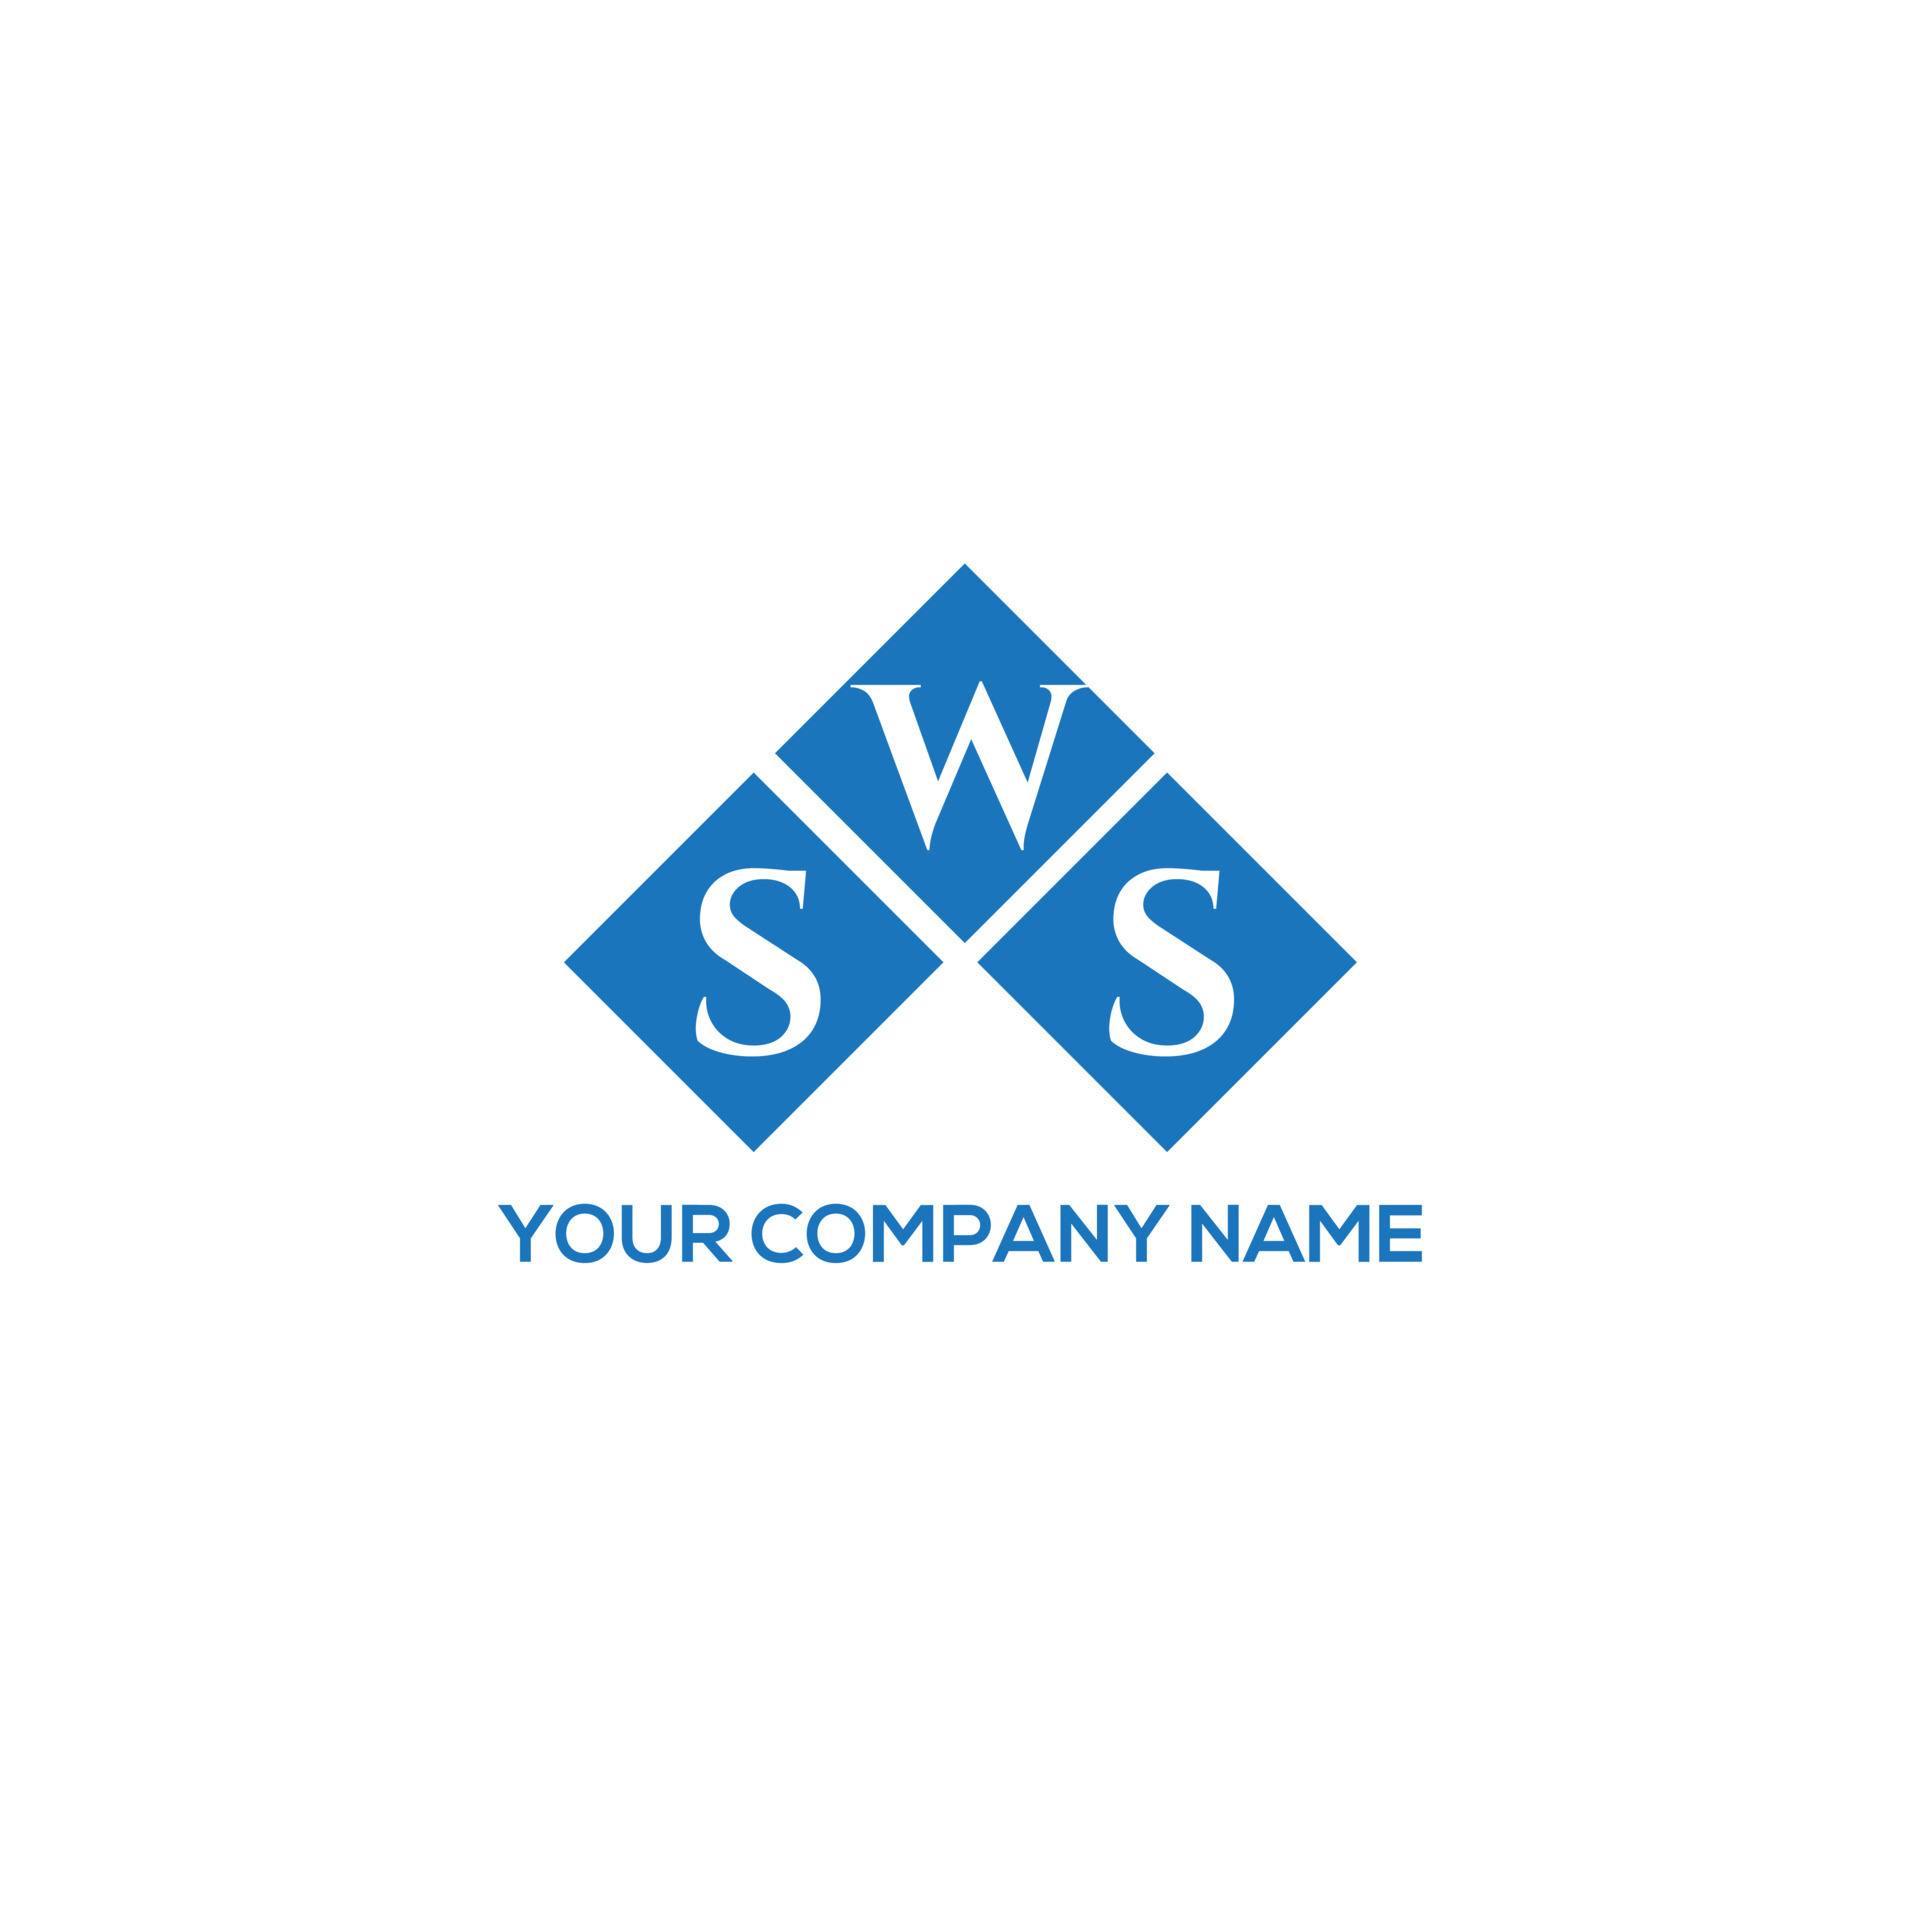 How To Design a Logo For Your Business - SWS Digital Agency